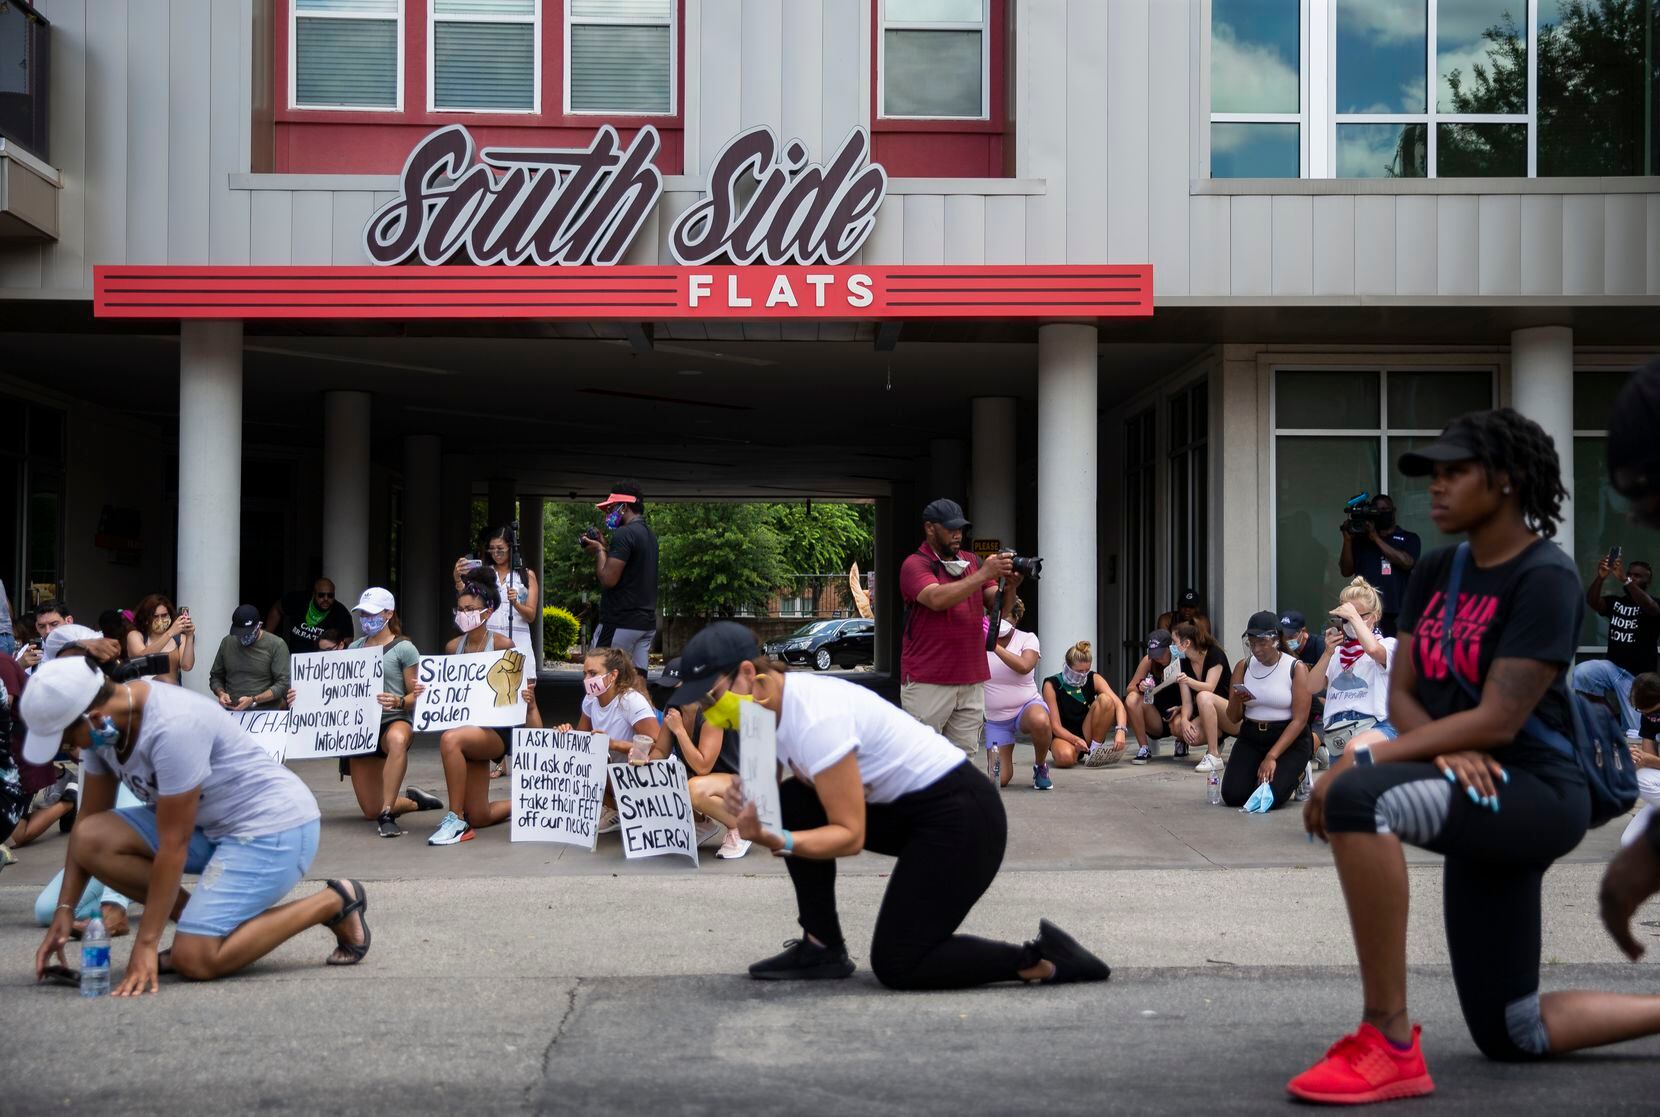 Protesters had an eight-minute moment of silence to honor George Floyd in front of South Side Flats, the apartment complex where former Dallas police officer Amber Guyger fatally shot Botham Jean in September 2018, during the National Injustice Peaceful Rally against police brutality in Dallas on Sunday. (Juan Figueroa/Staff Photographer)